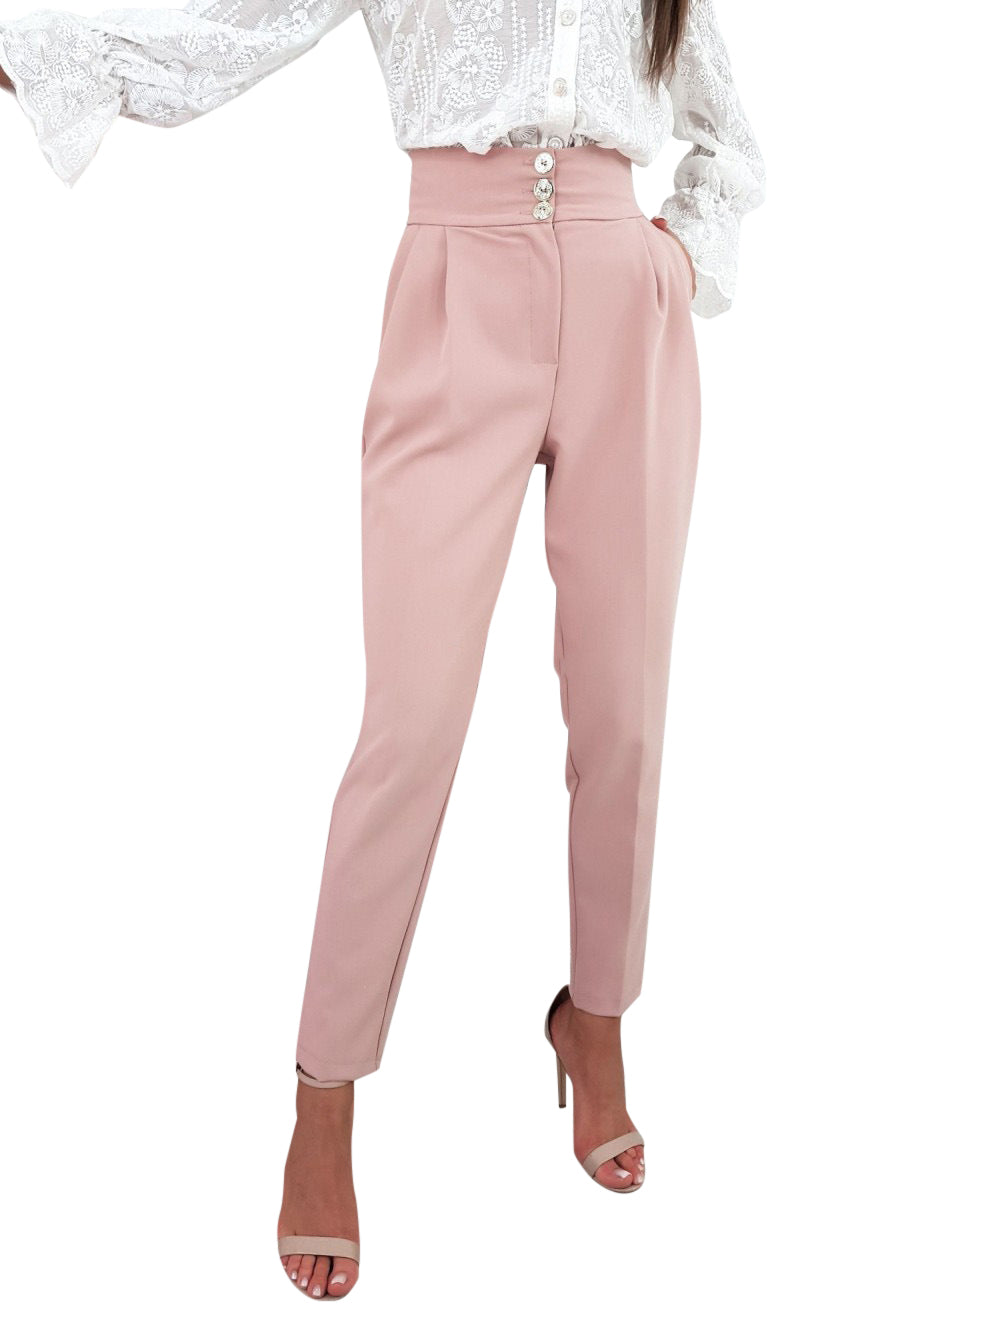 YESFASHION Solid Color Slim Fitting Pants Button Pants